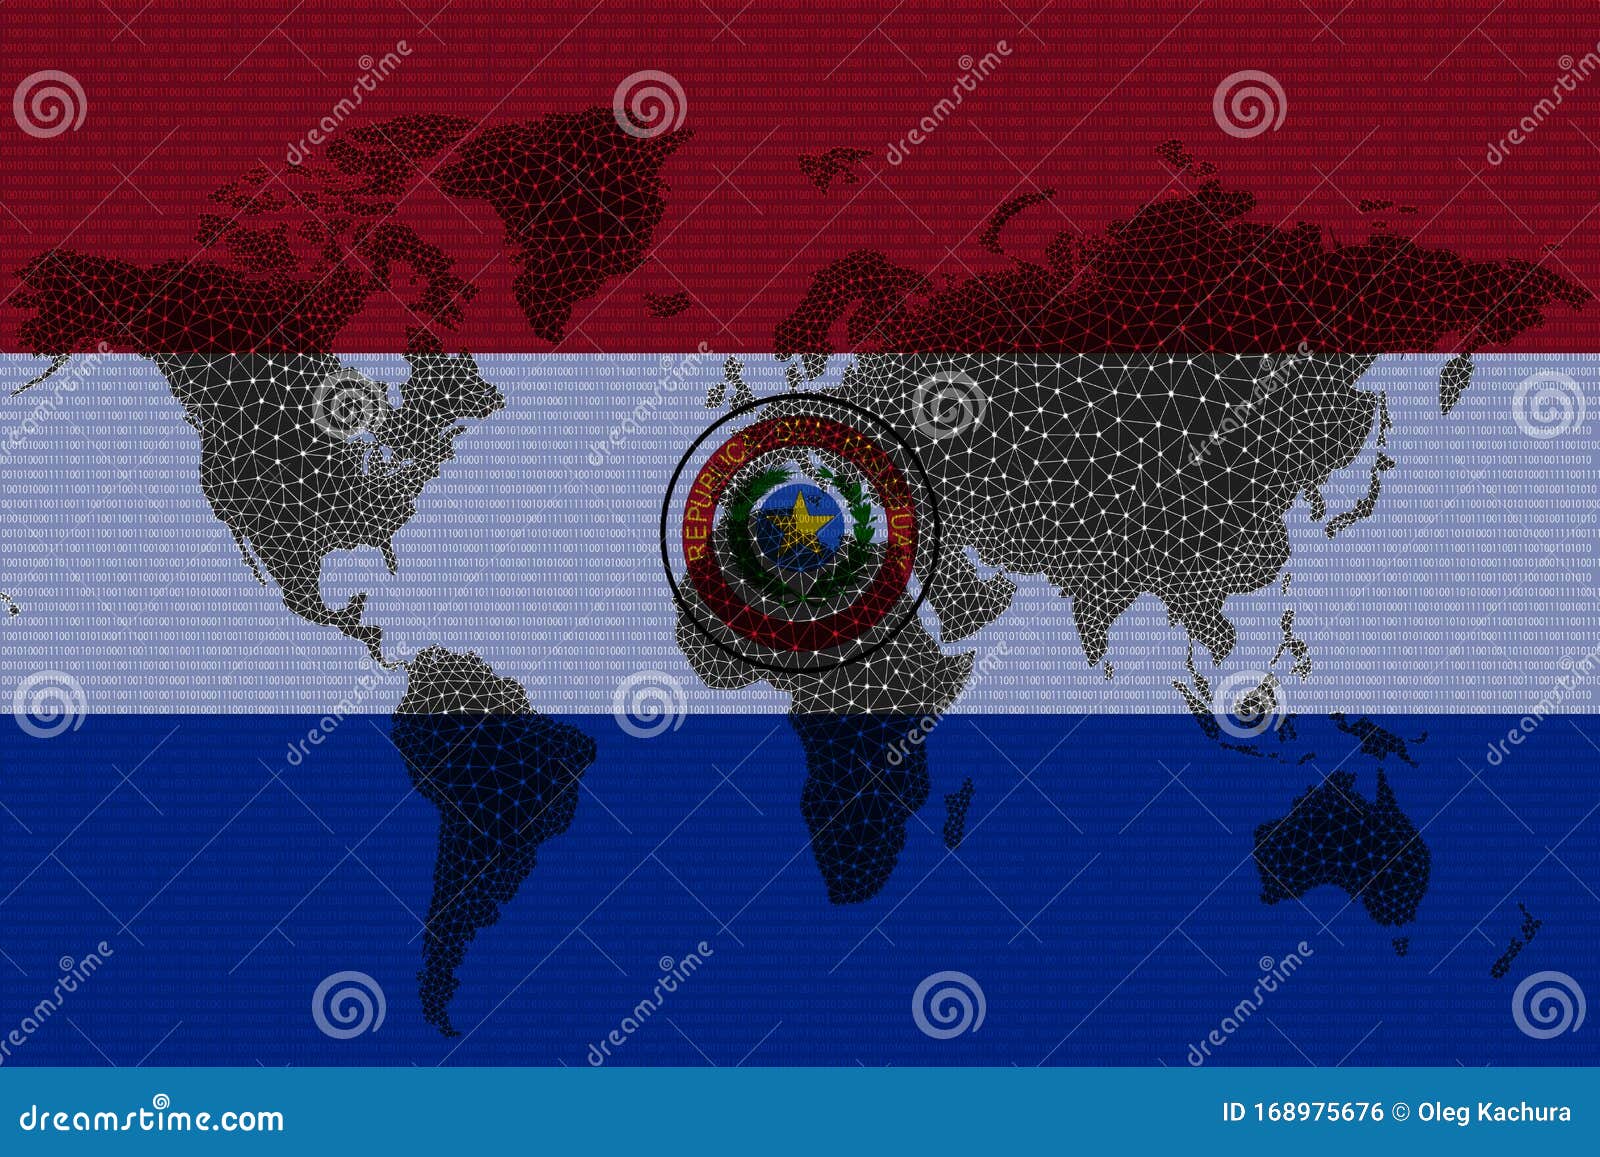 blockchain world map on the background of the flag of paraguai and cracks. paraguai cryptocurrency concept